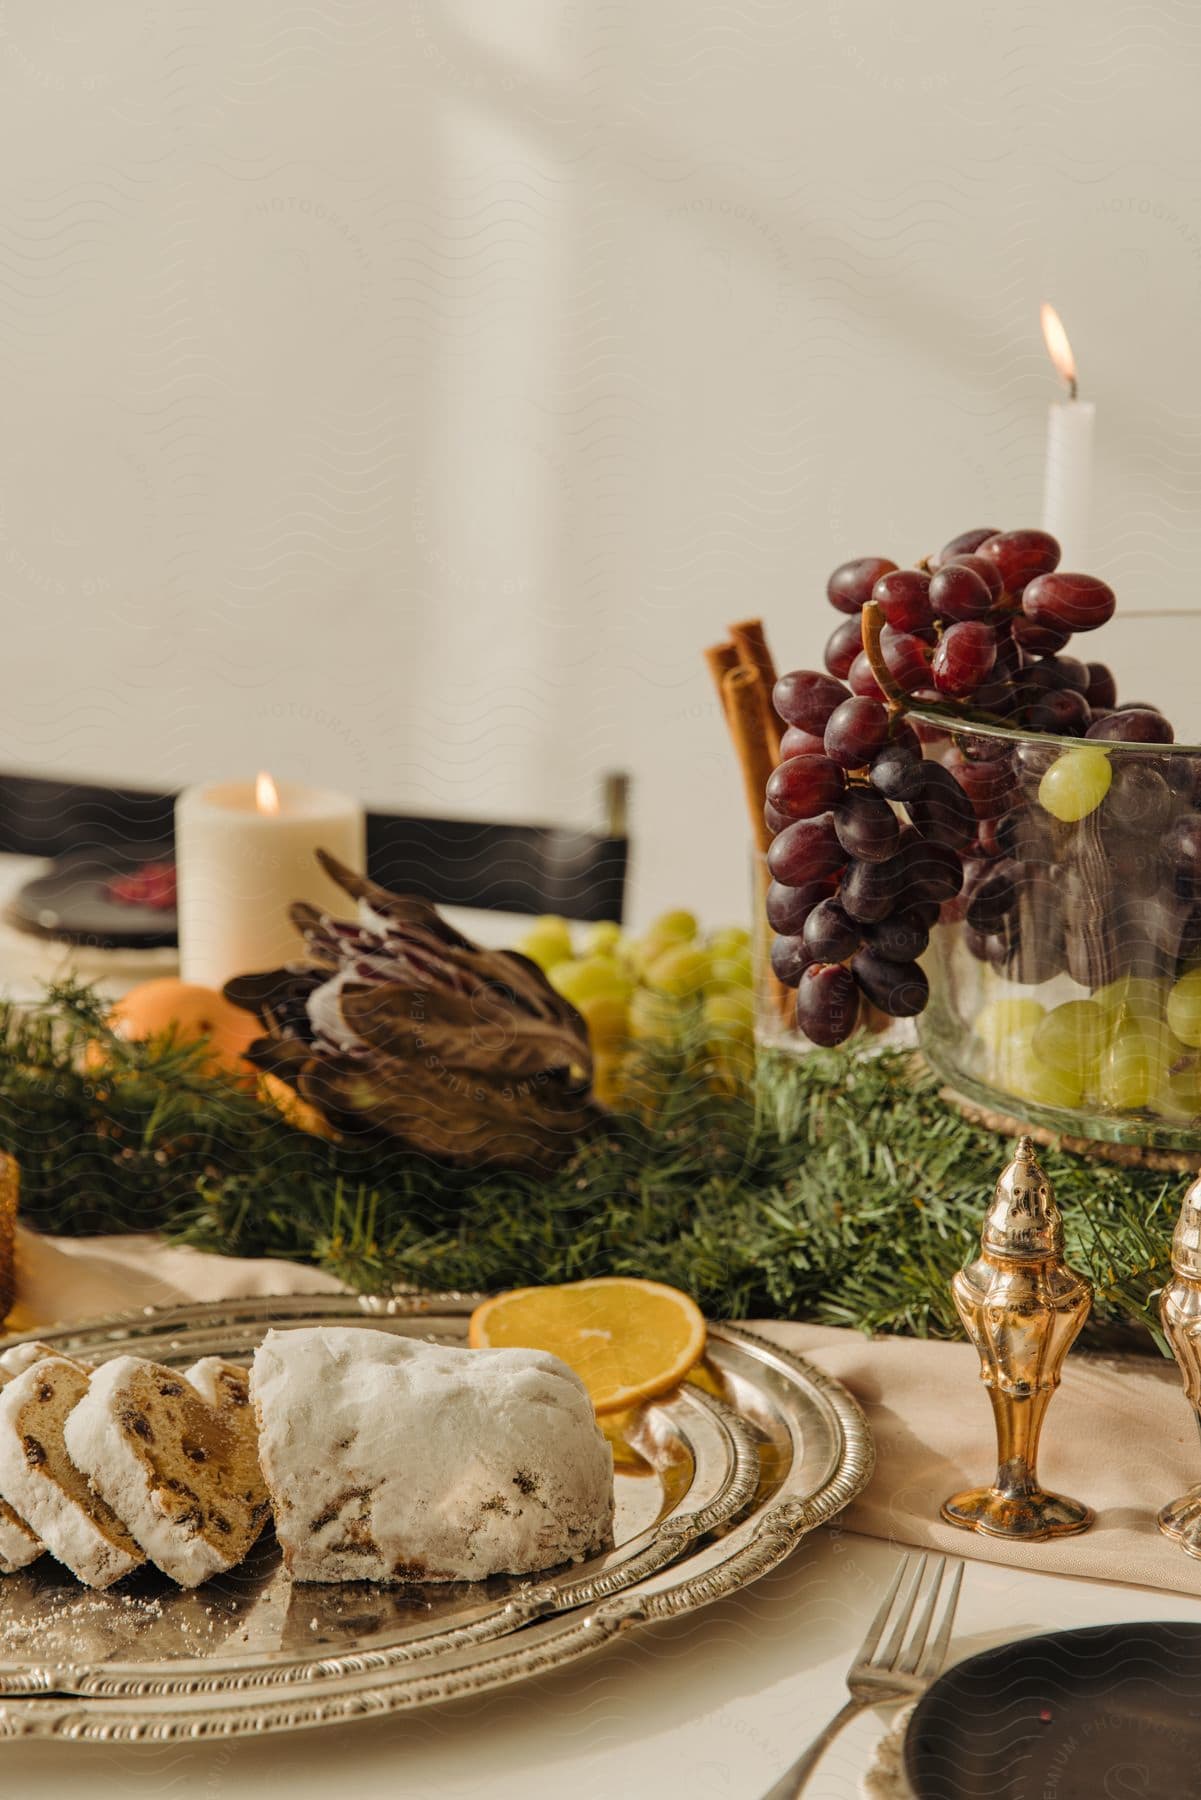 Fruit cake, grapes, and other desserts, on a christmas table.